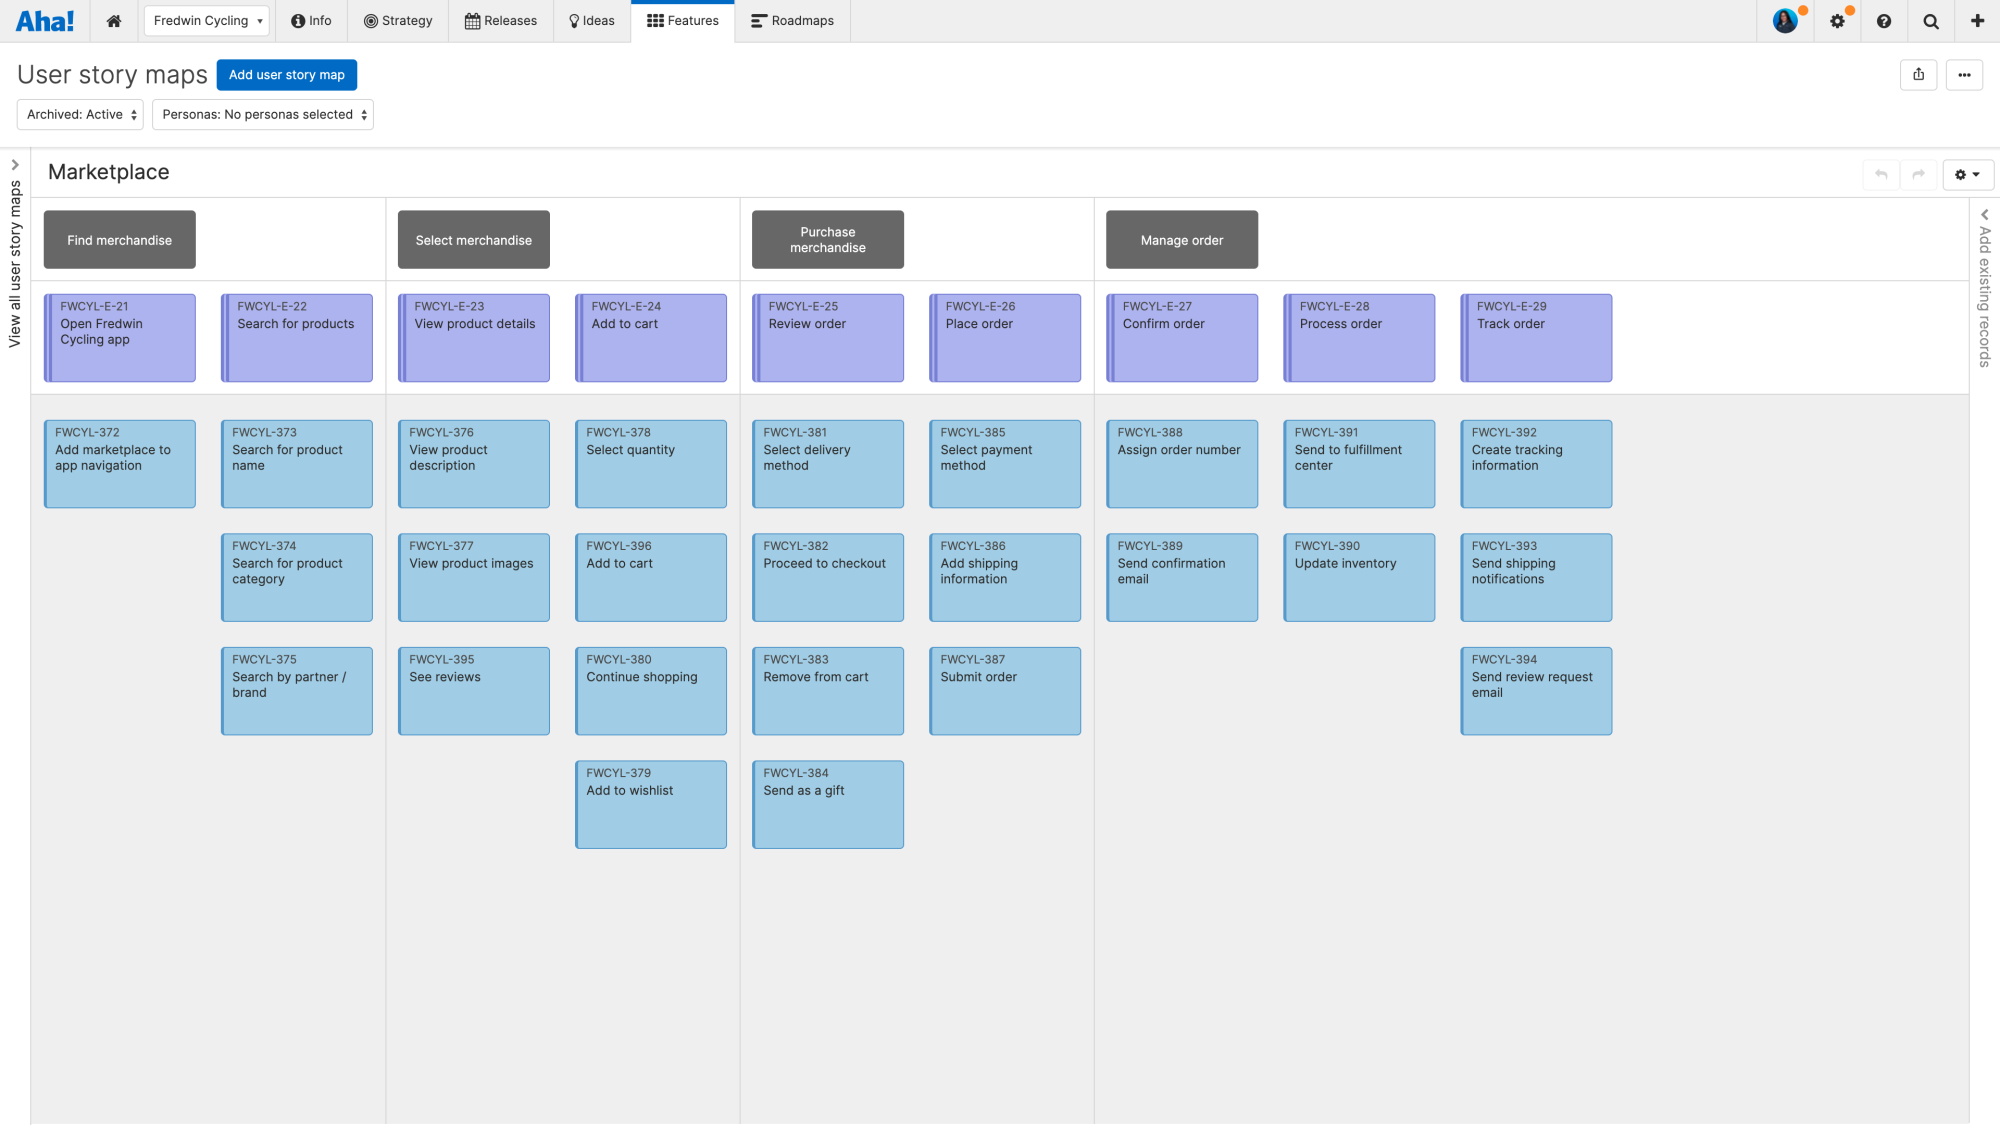 An example of a user story map in Aha!